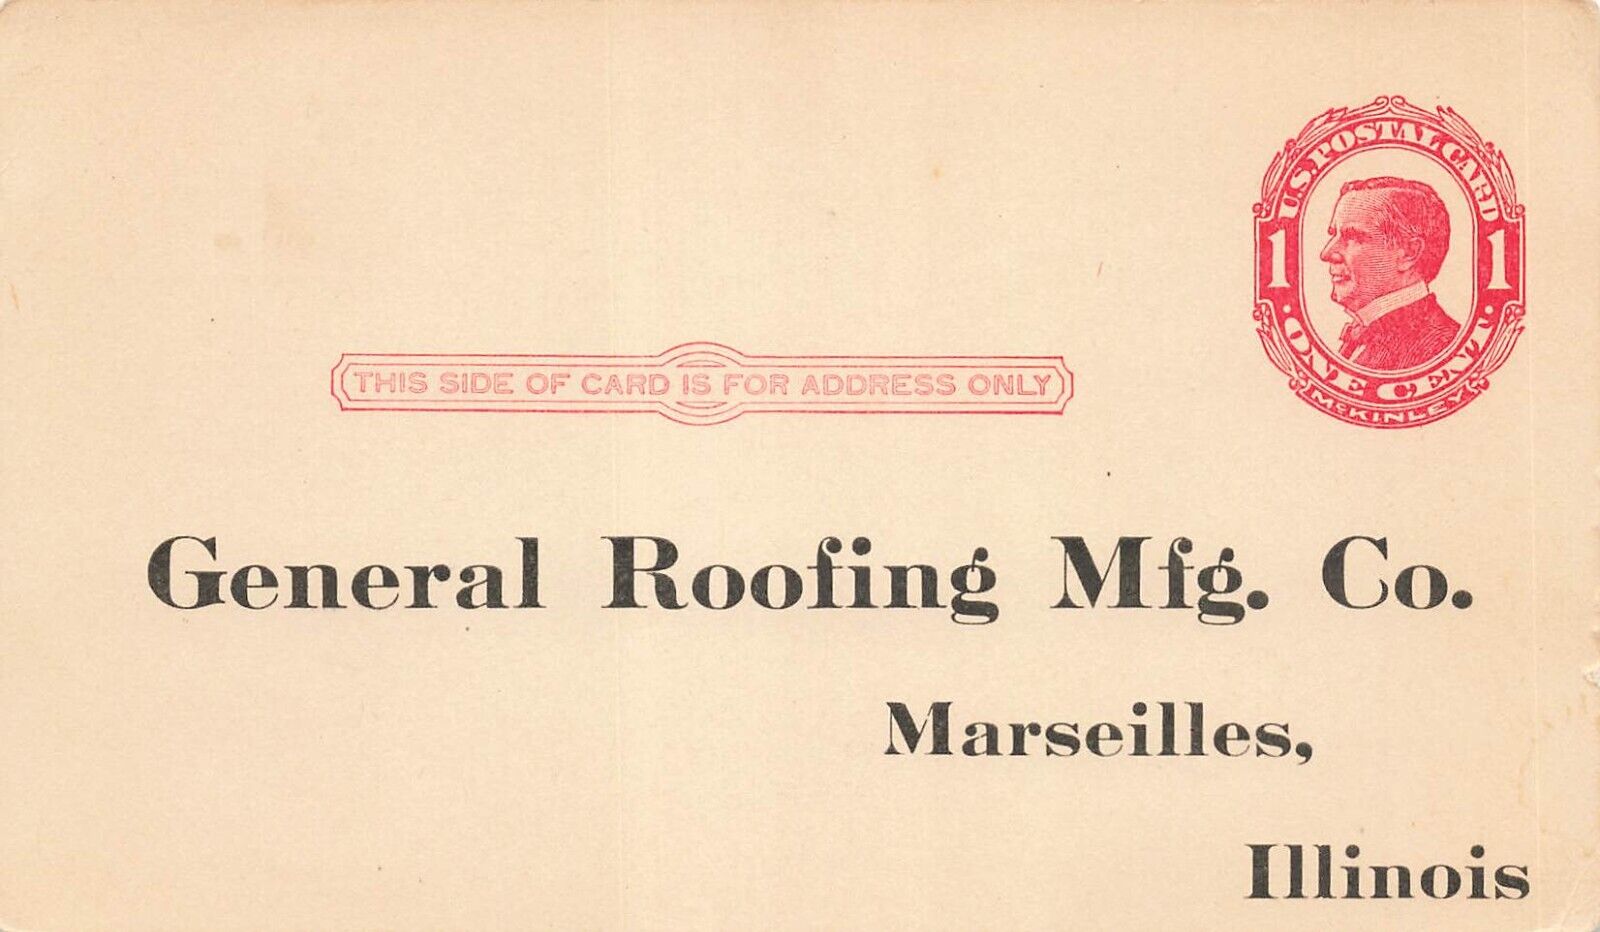 ADVERTISING POSTCARD: GENERAL ROOFING MFG. CO., MARSEILLES, IL